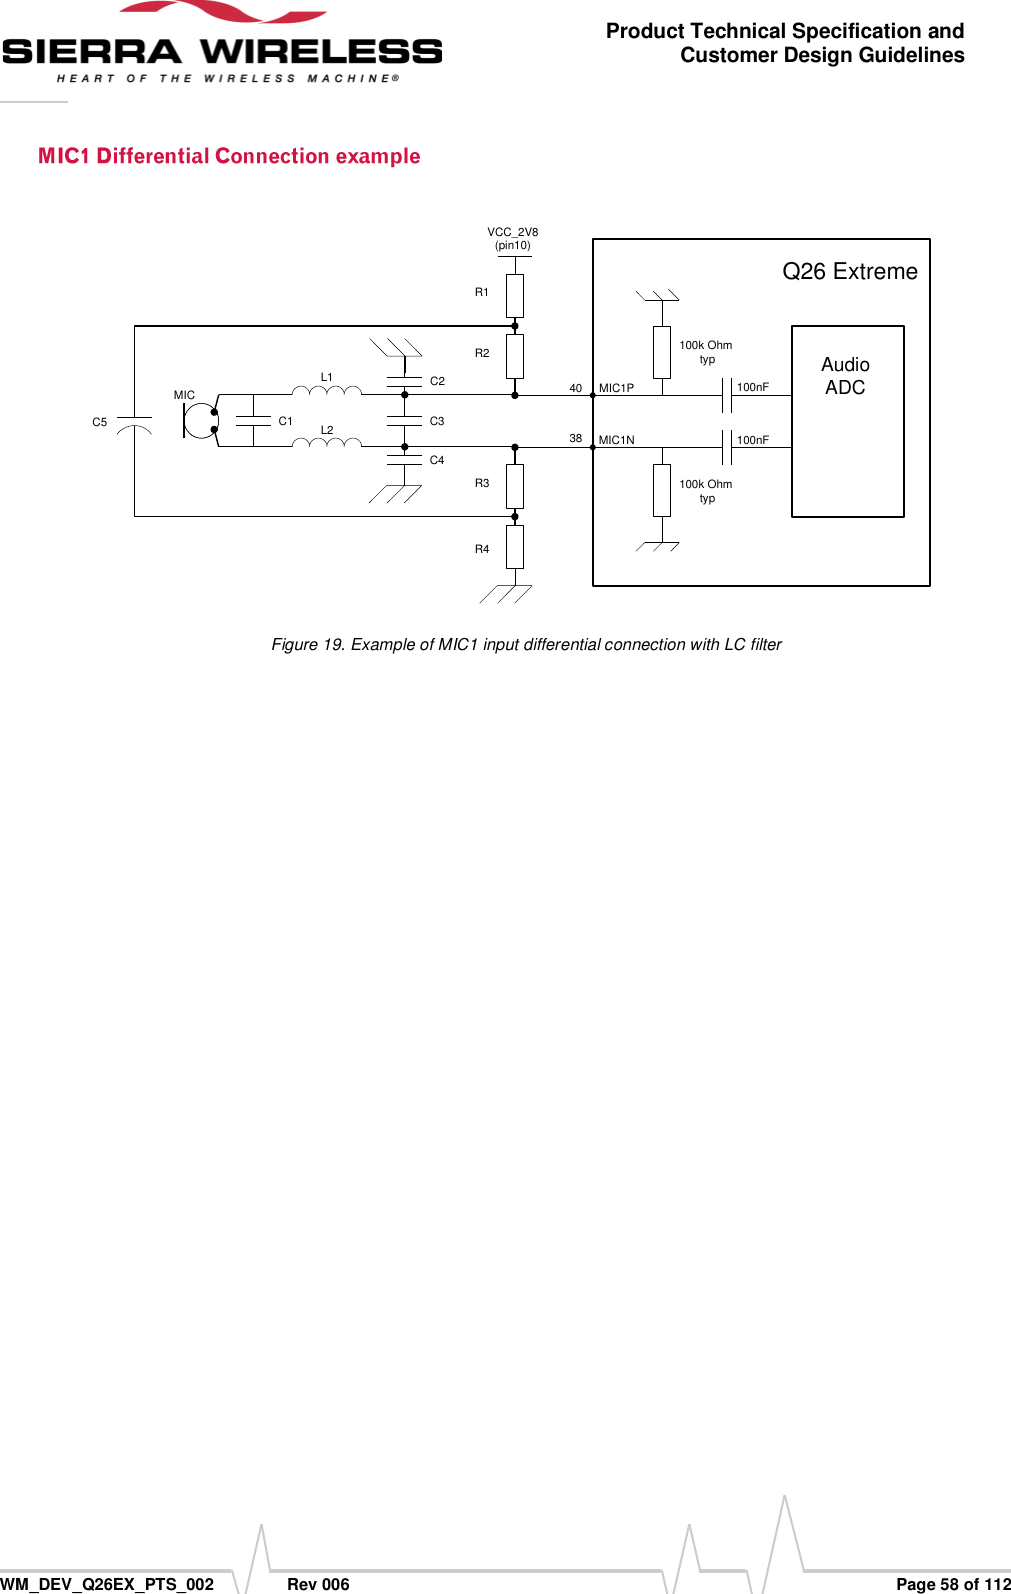      WM_DEV_Q26EX_PTS_002  Rev 006  Page 58 of 112 Product Technical Specification and Customer Design Guidelines  C54038AudioADC100k Ohm typ100k Ohm typ100nF100nFMIC1PMIC1NVCC_2V8(pin10)R3R2R1R4C2C3C1L1L2C4MICQ26 Extreme Figure 19. Example of MIC1 input differential connection with LC filter 